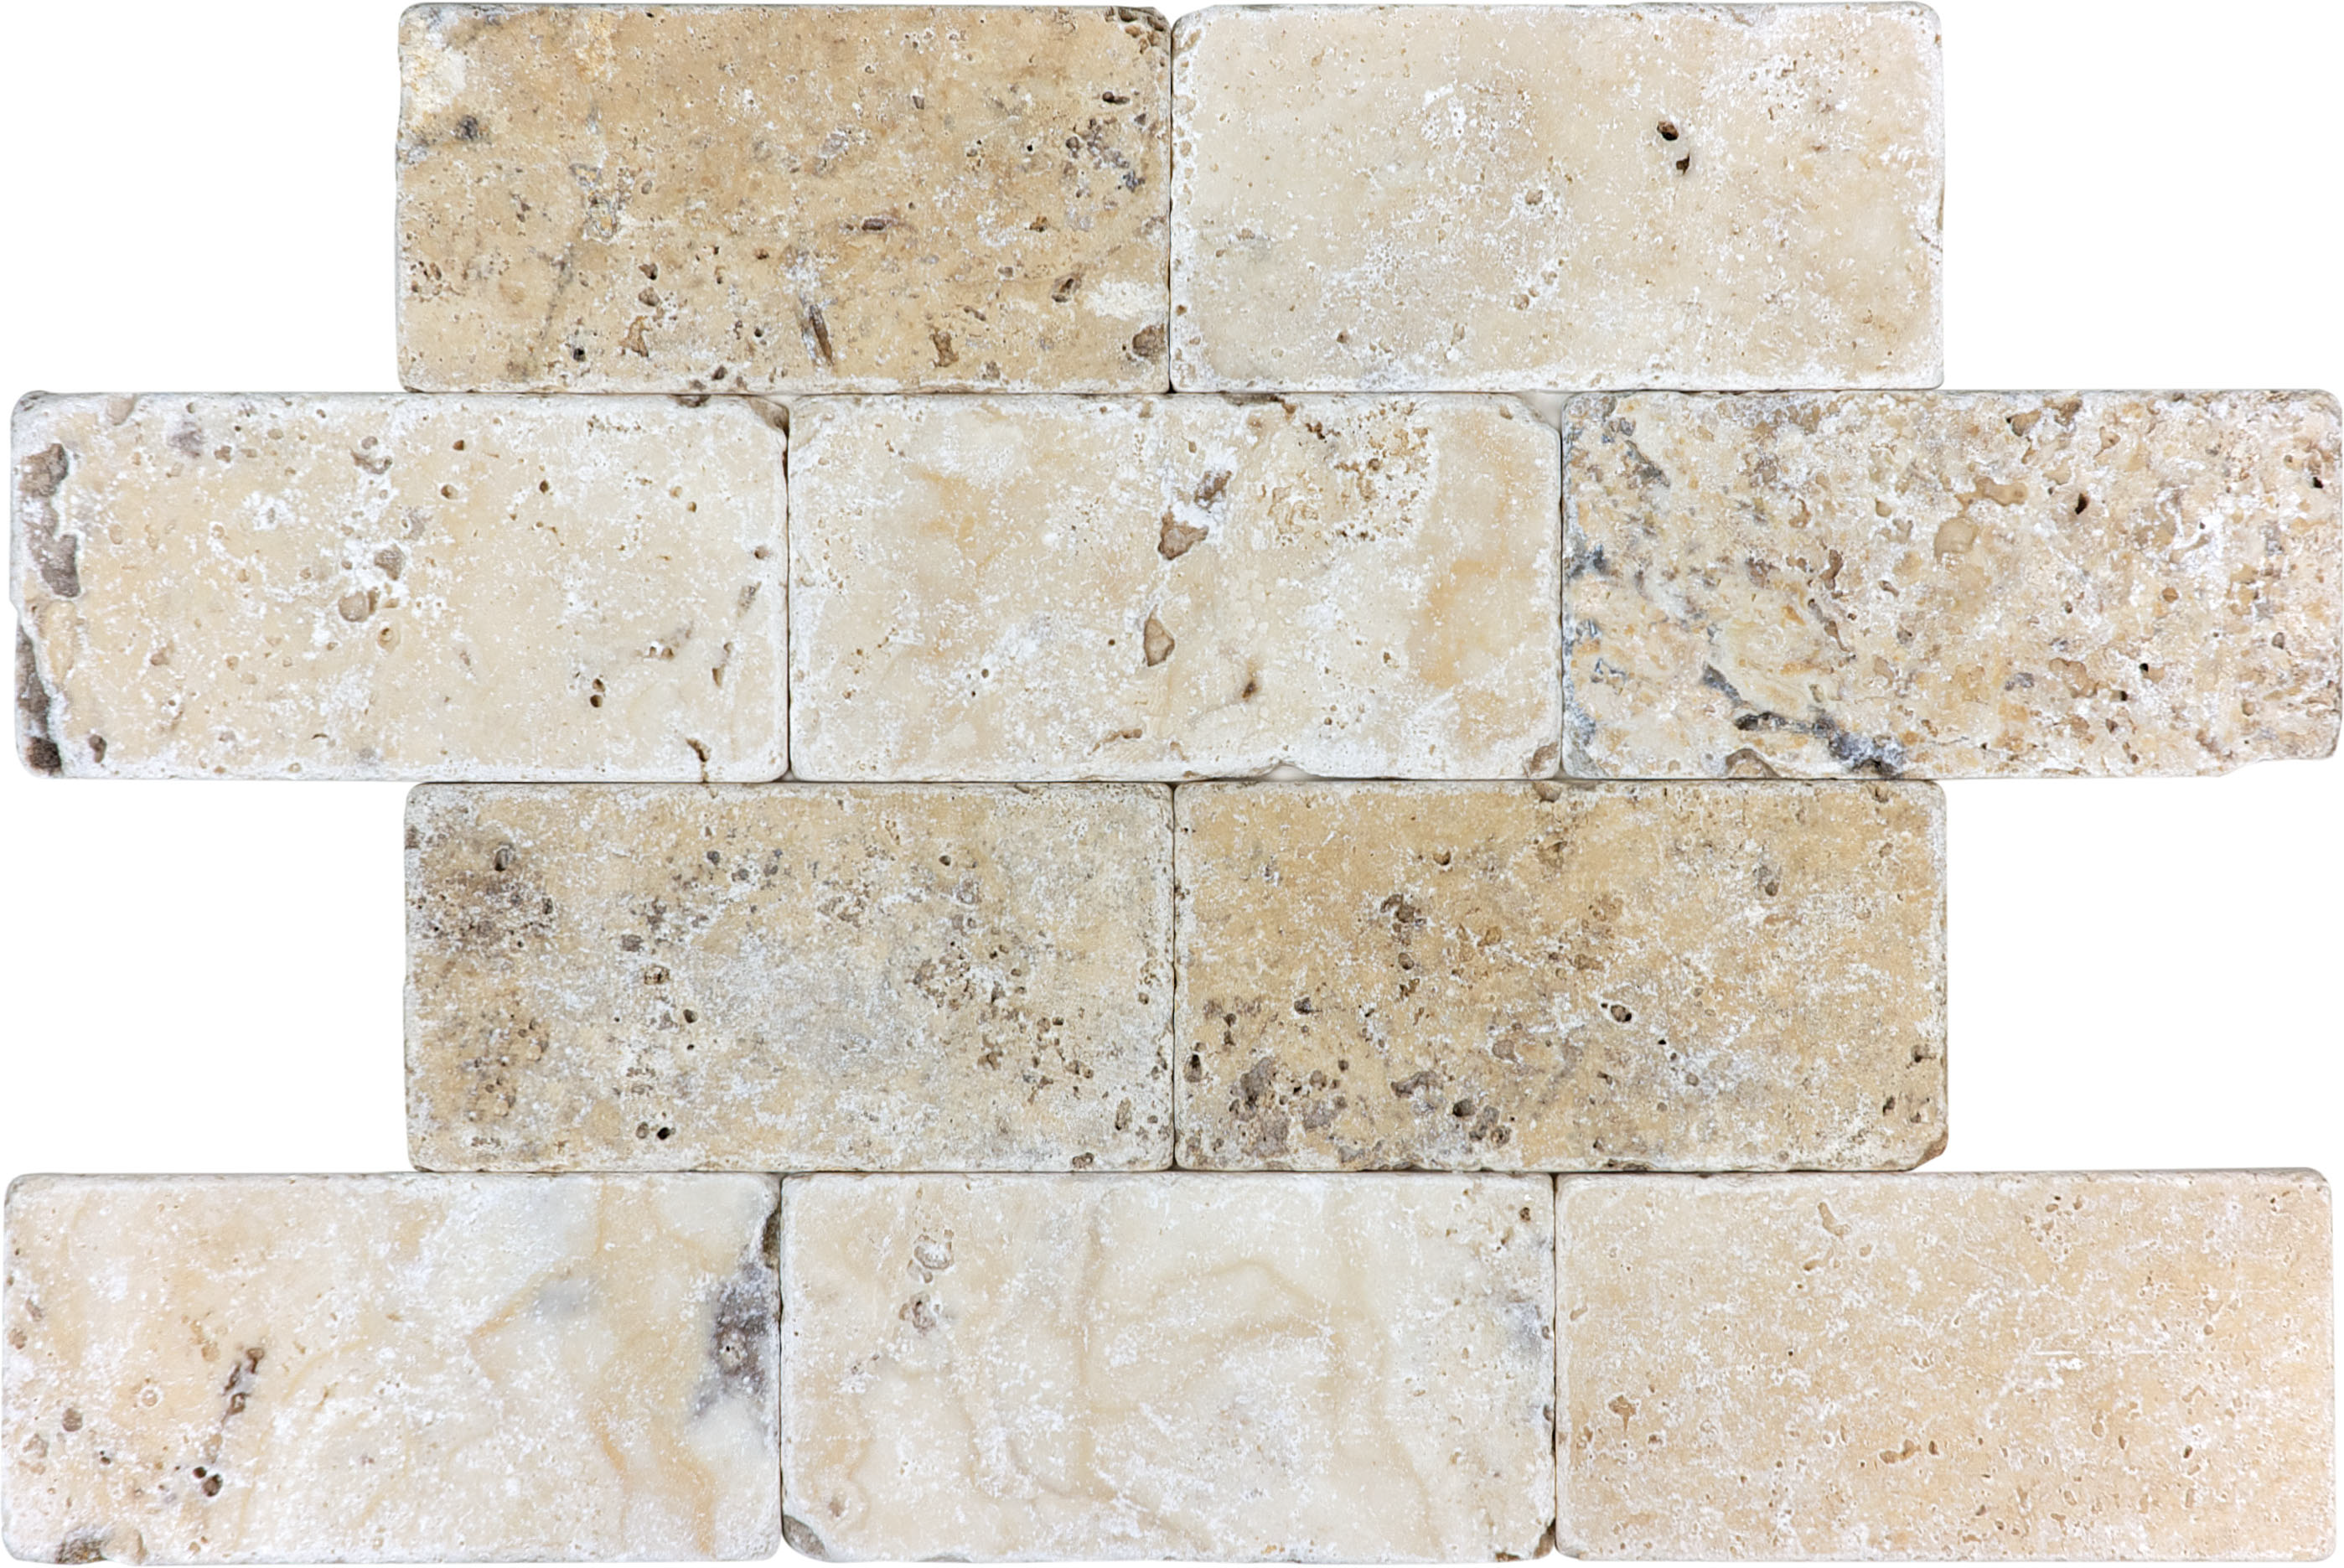 travertine pattern natural stone field tile from picasso anatolia collection distributed by surface group international tumbled finish tumbled edge 3x6 rectangle shape